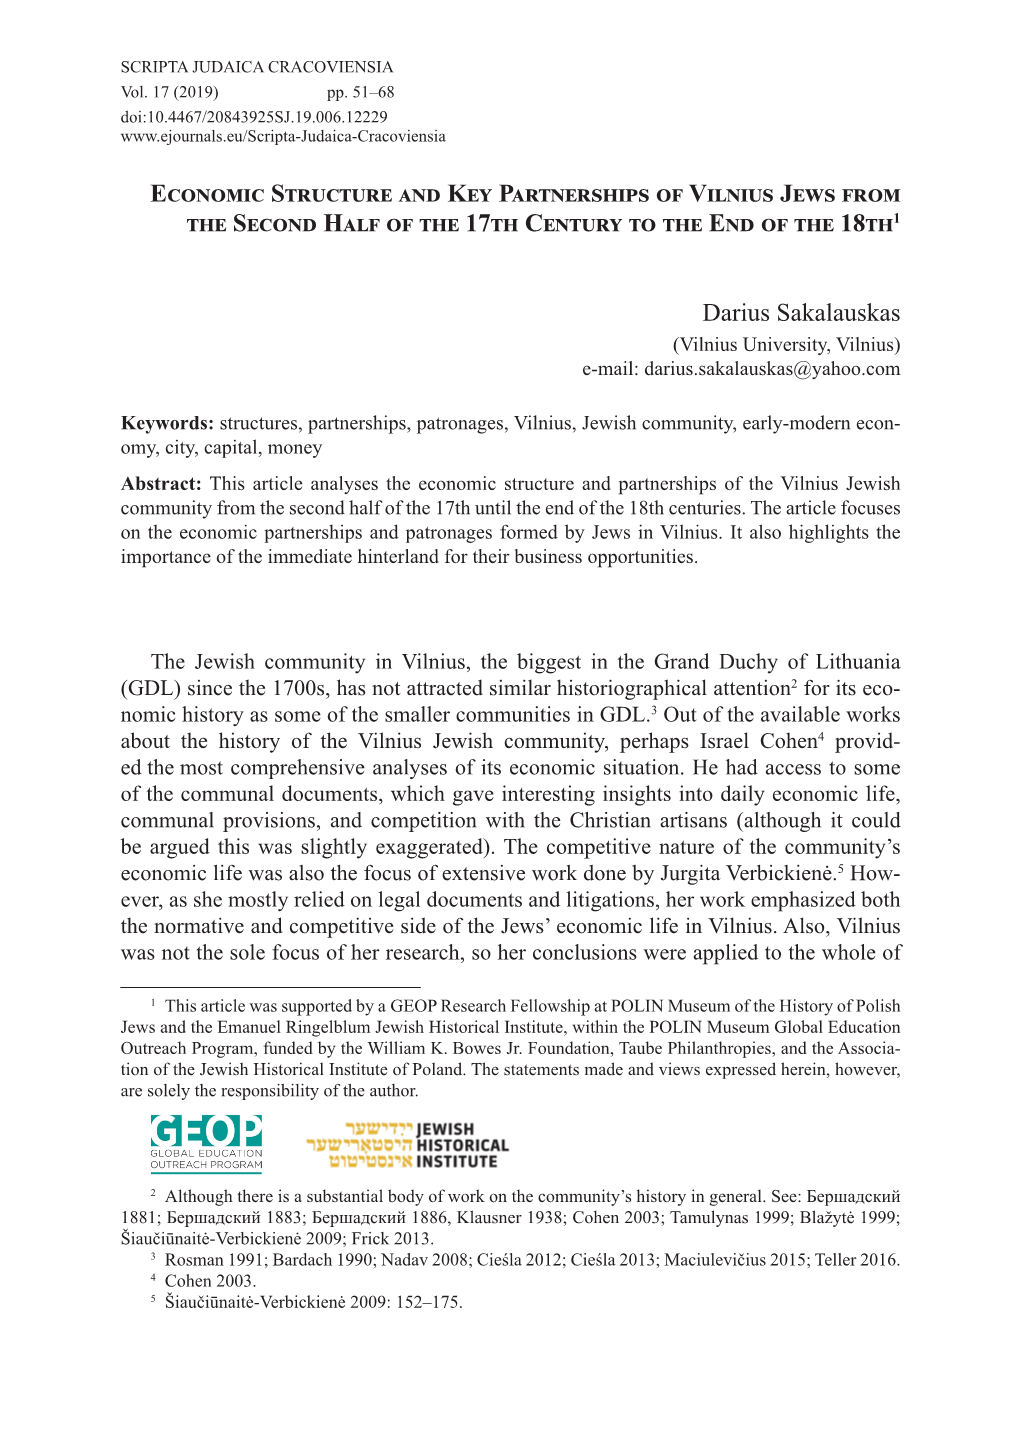 Economic Structure and Key Partnerships of Vilnius Jews from the Second Half of the 17Th Century to the End of the 18Th1